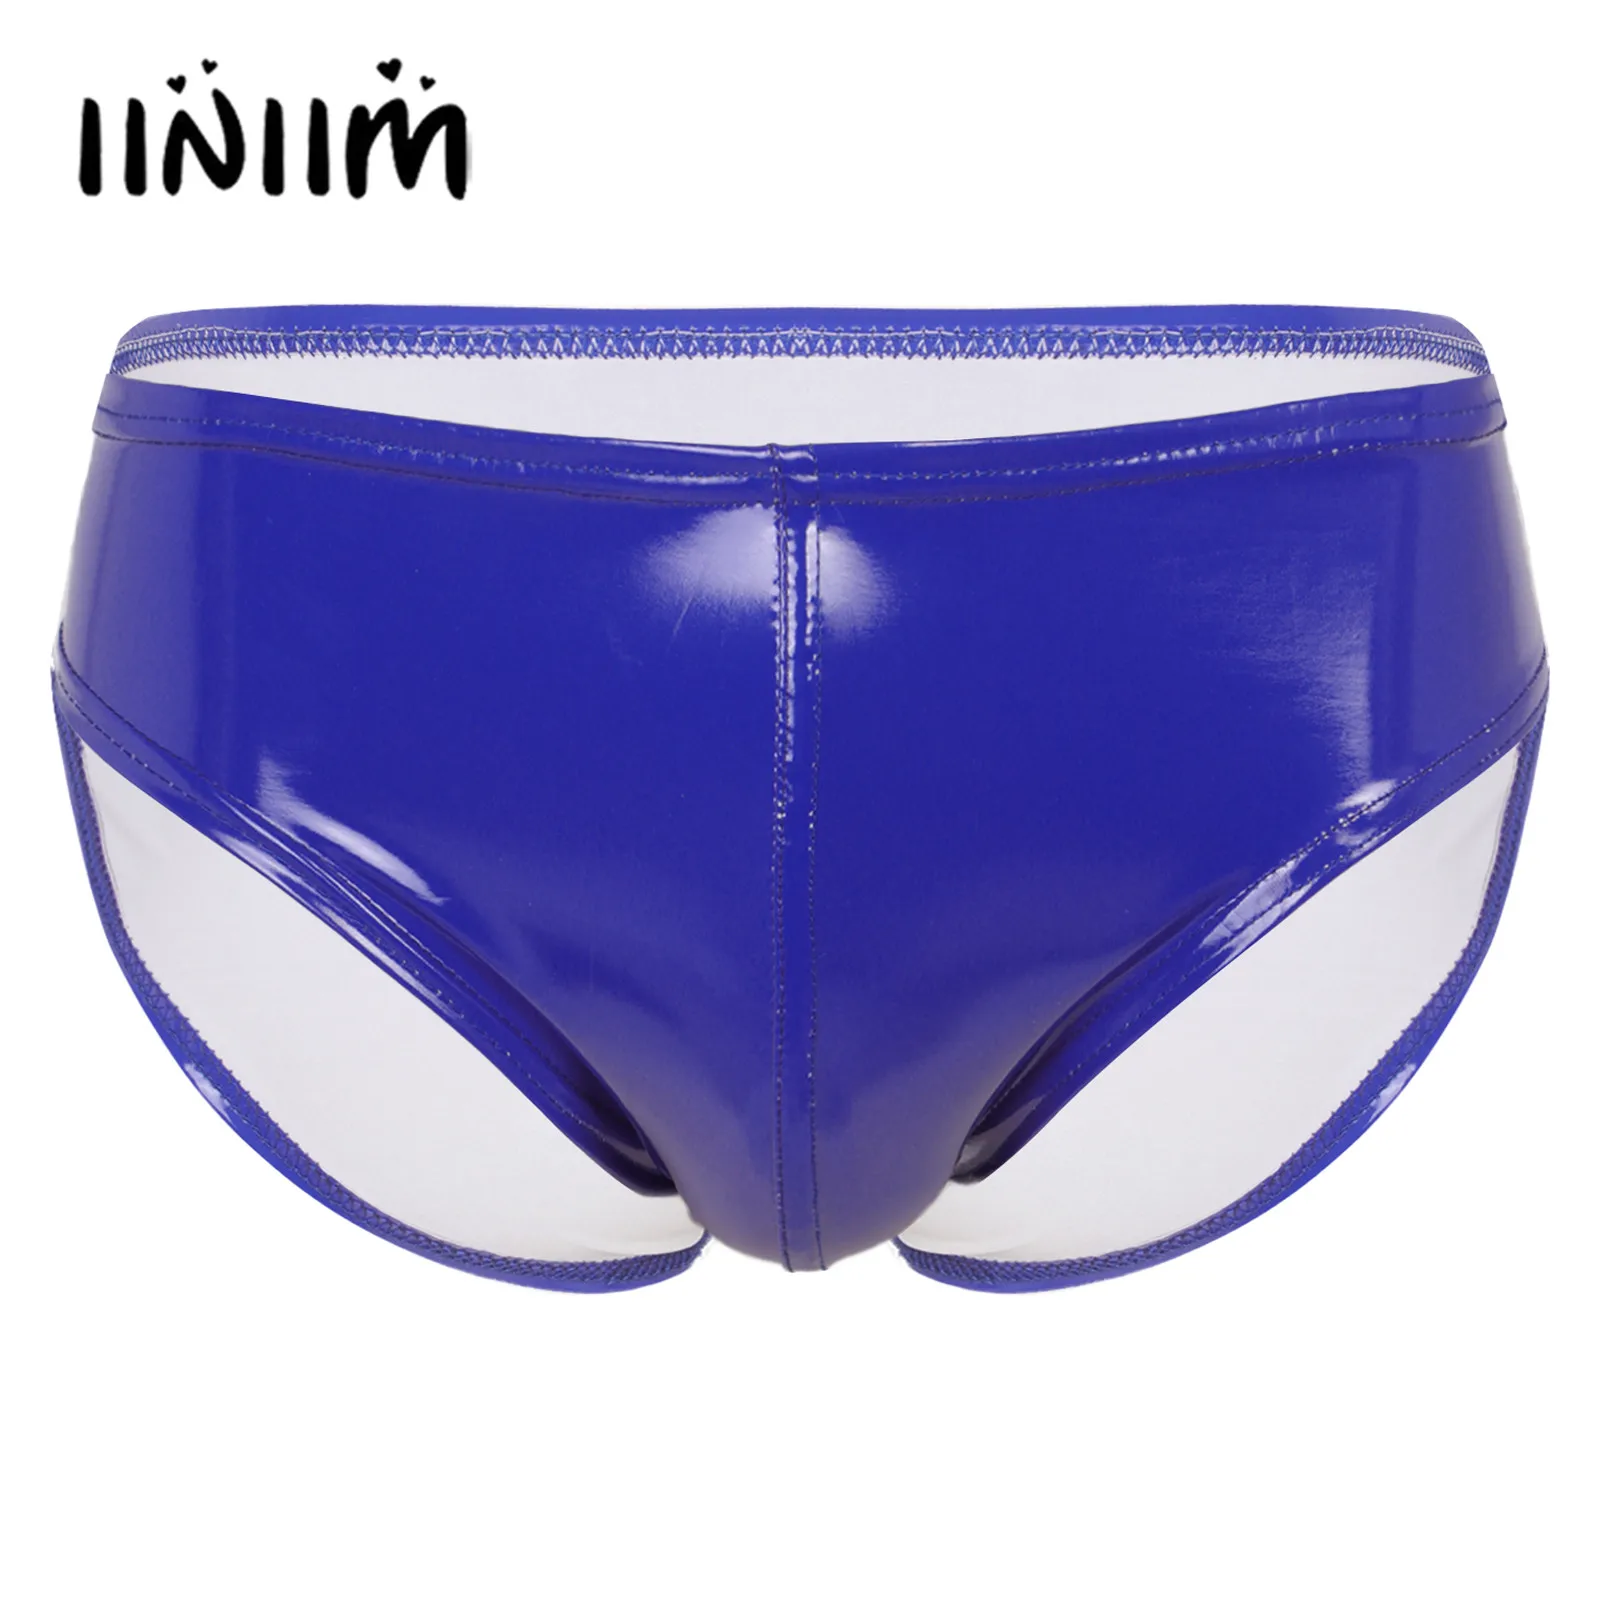 

Mens Sexy Briefs Panties Wet Look Patent Leather Elastic Waistband Underwear Underpants for Pole Dancing Rave Outfit Clubwear